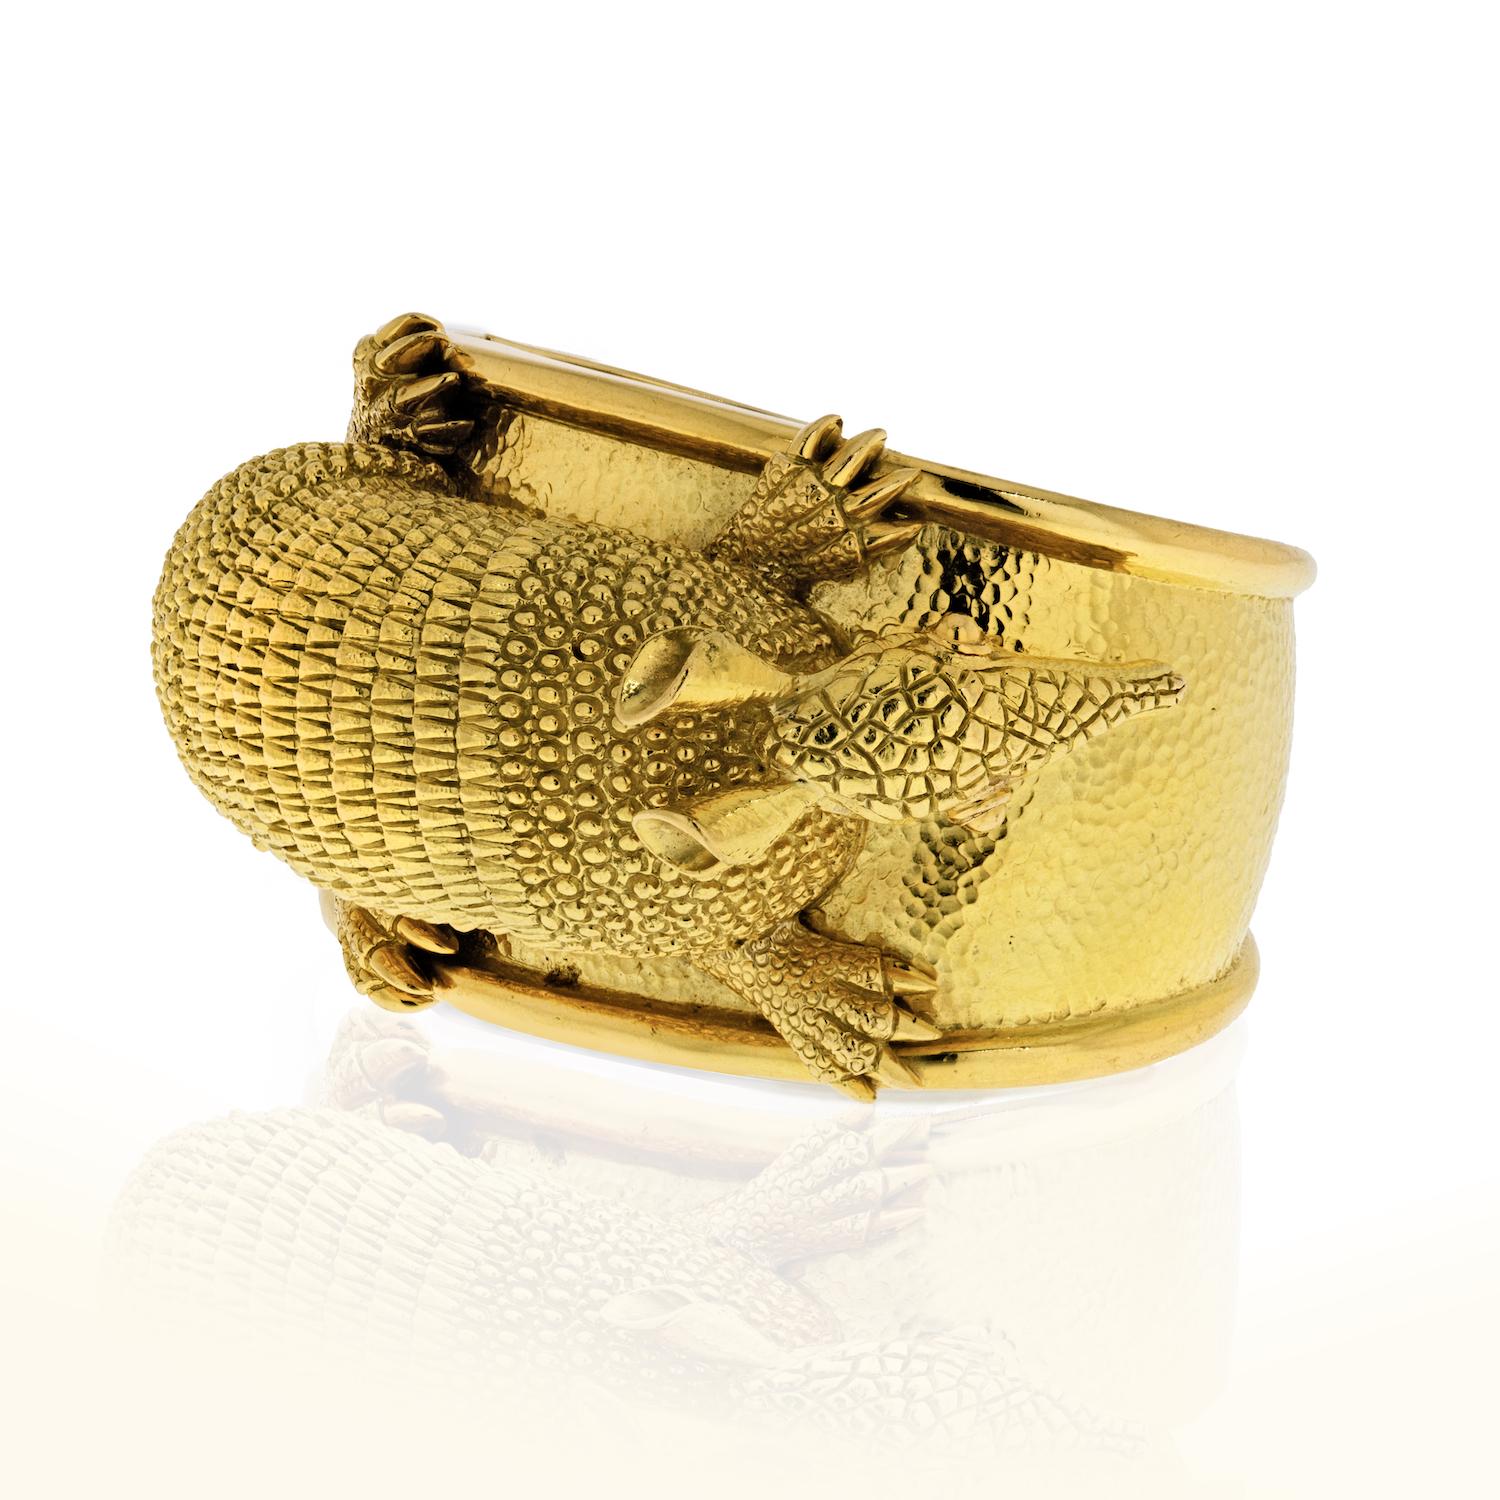 Only at The Back Vault you will find such quirky jewelry like this Armadillo. For those who grew up in the South these animals will remind of home. A playful twist to your outfit and certainly a conversation piece this gold Armadillo cuff by David